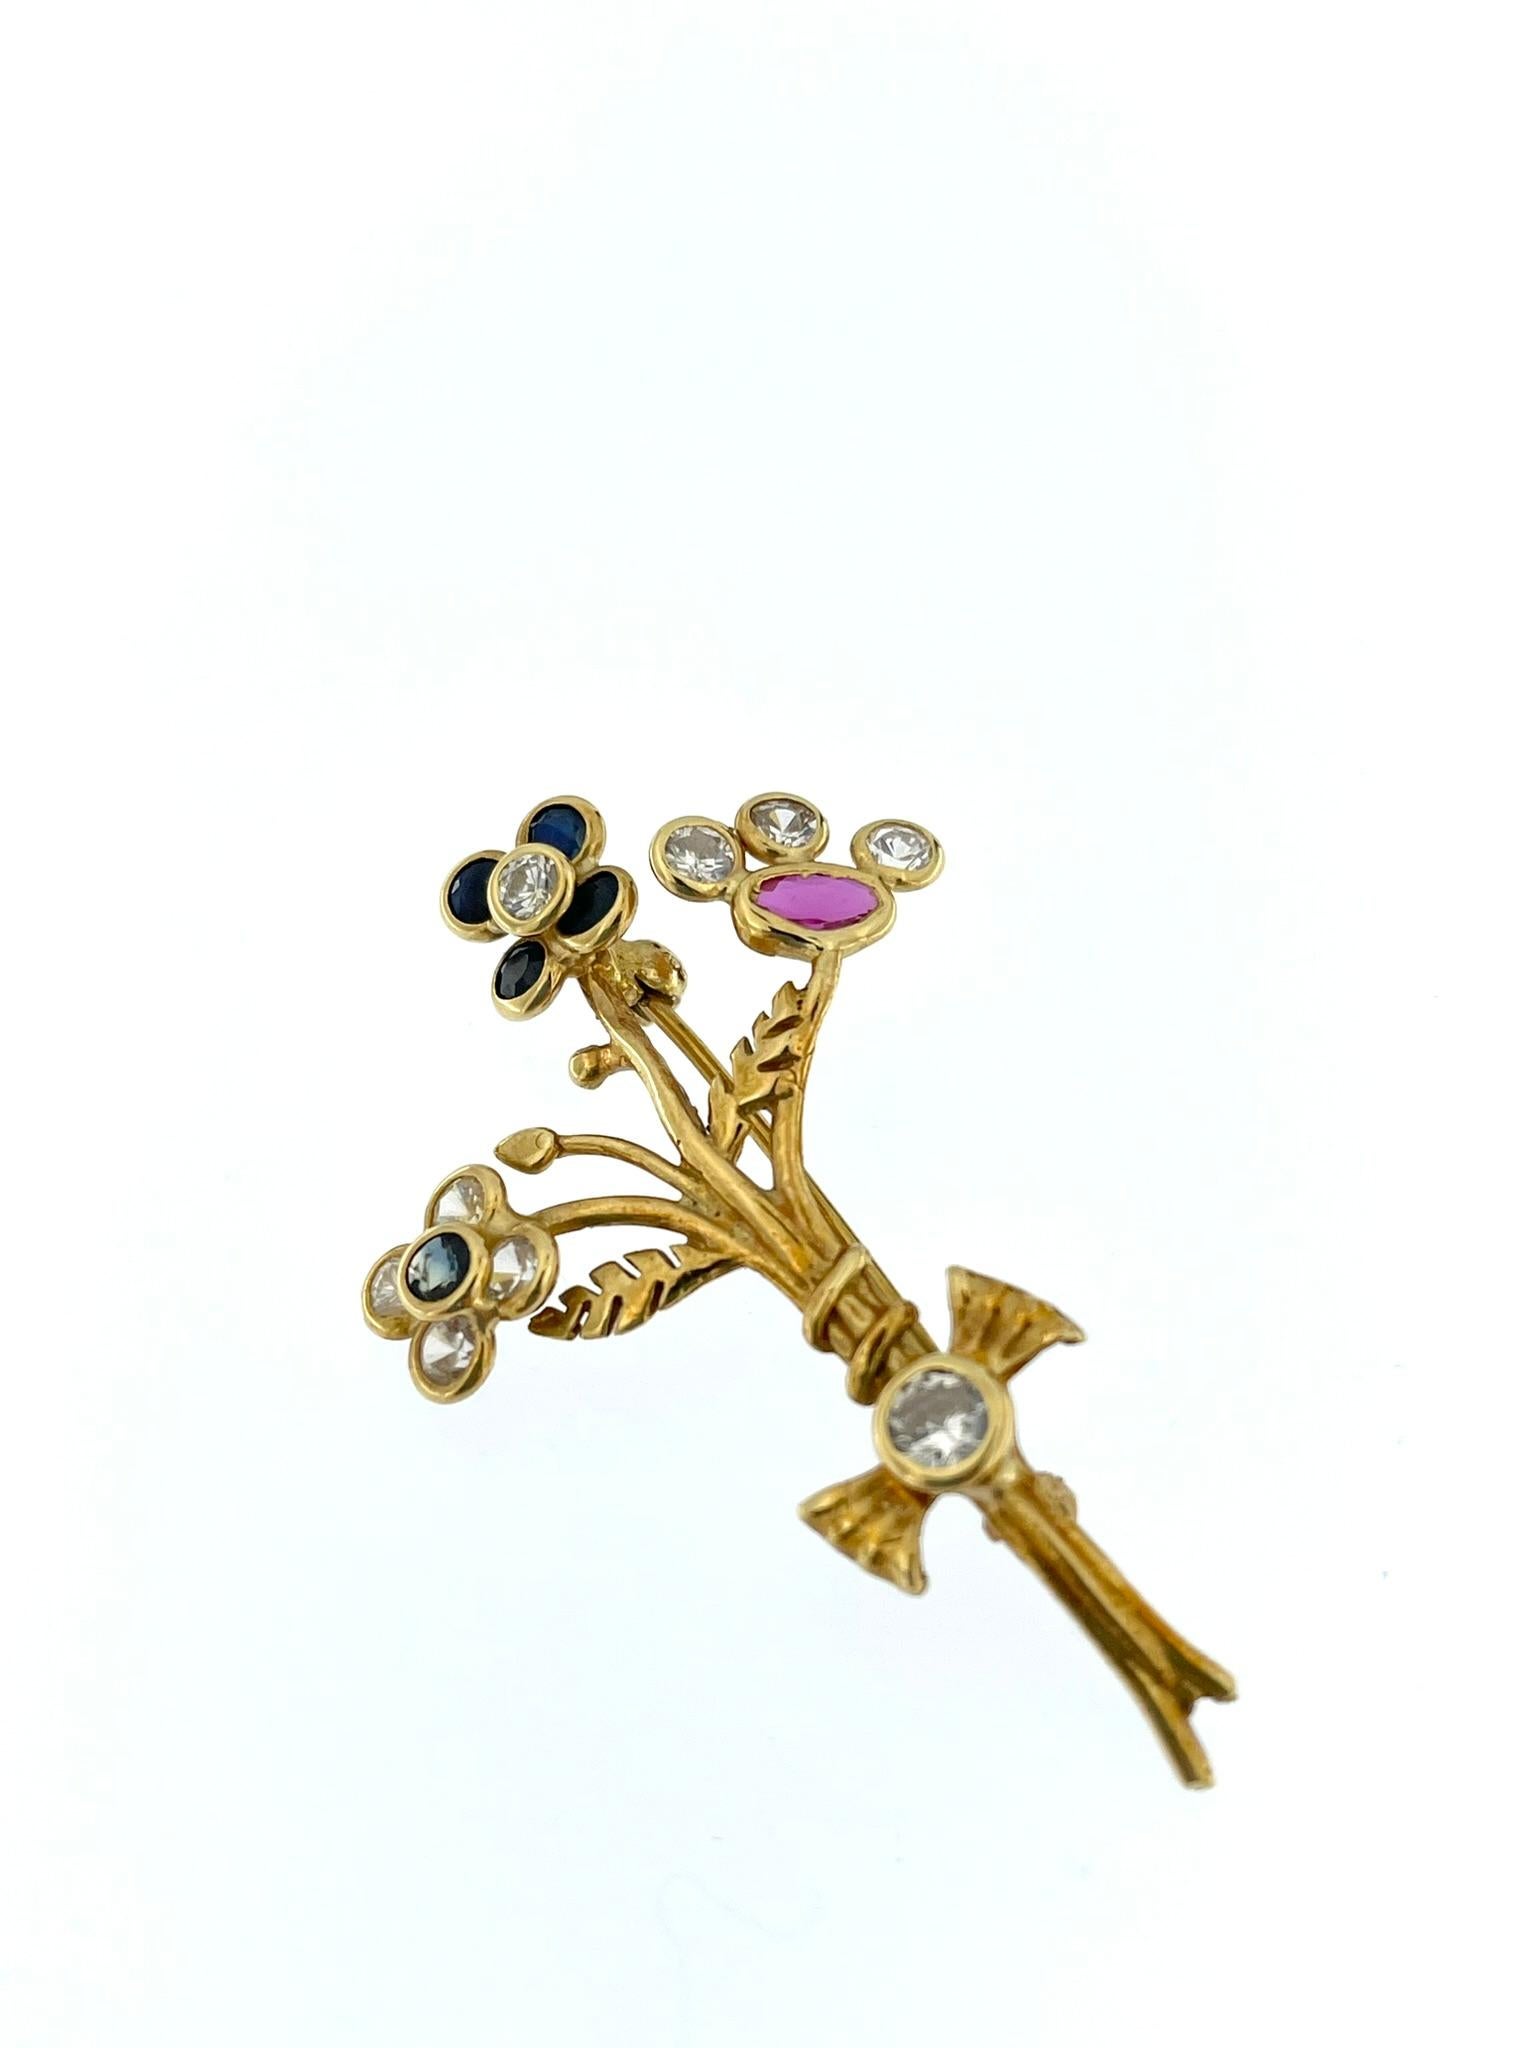 The Handcrafted 18 karat Yellow Gold Brooch with Zircons and Quartz is a stunning piece of jewelry that combines exquisite craftsmanship with luxurious materials. The brooch is made from high-quality 18 karat yellow gold, showcasing a rich and warm